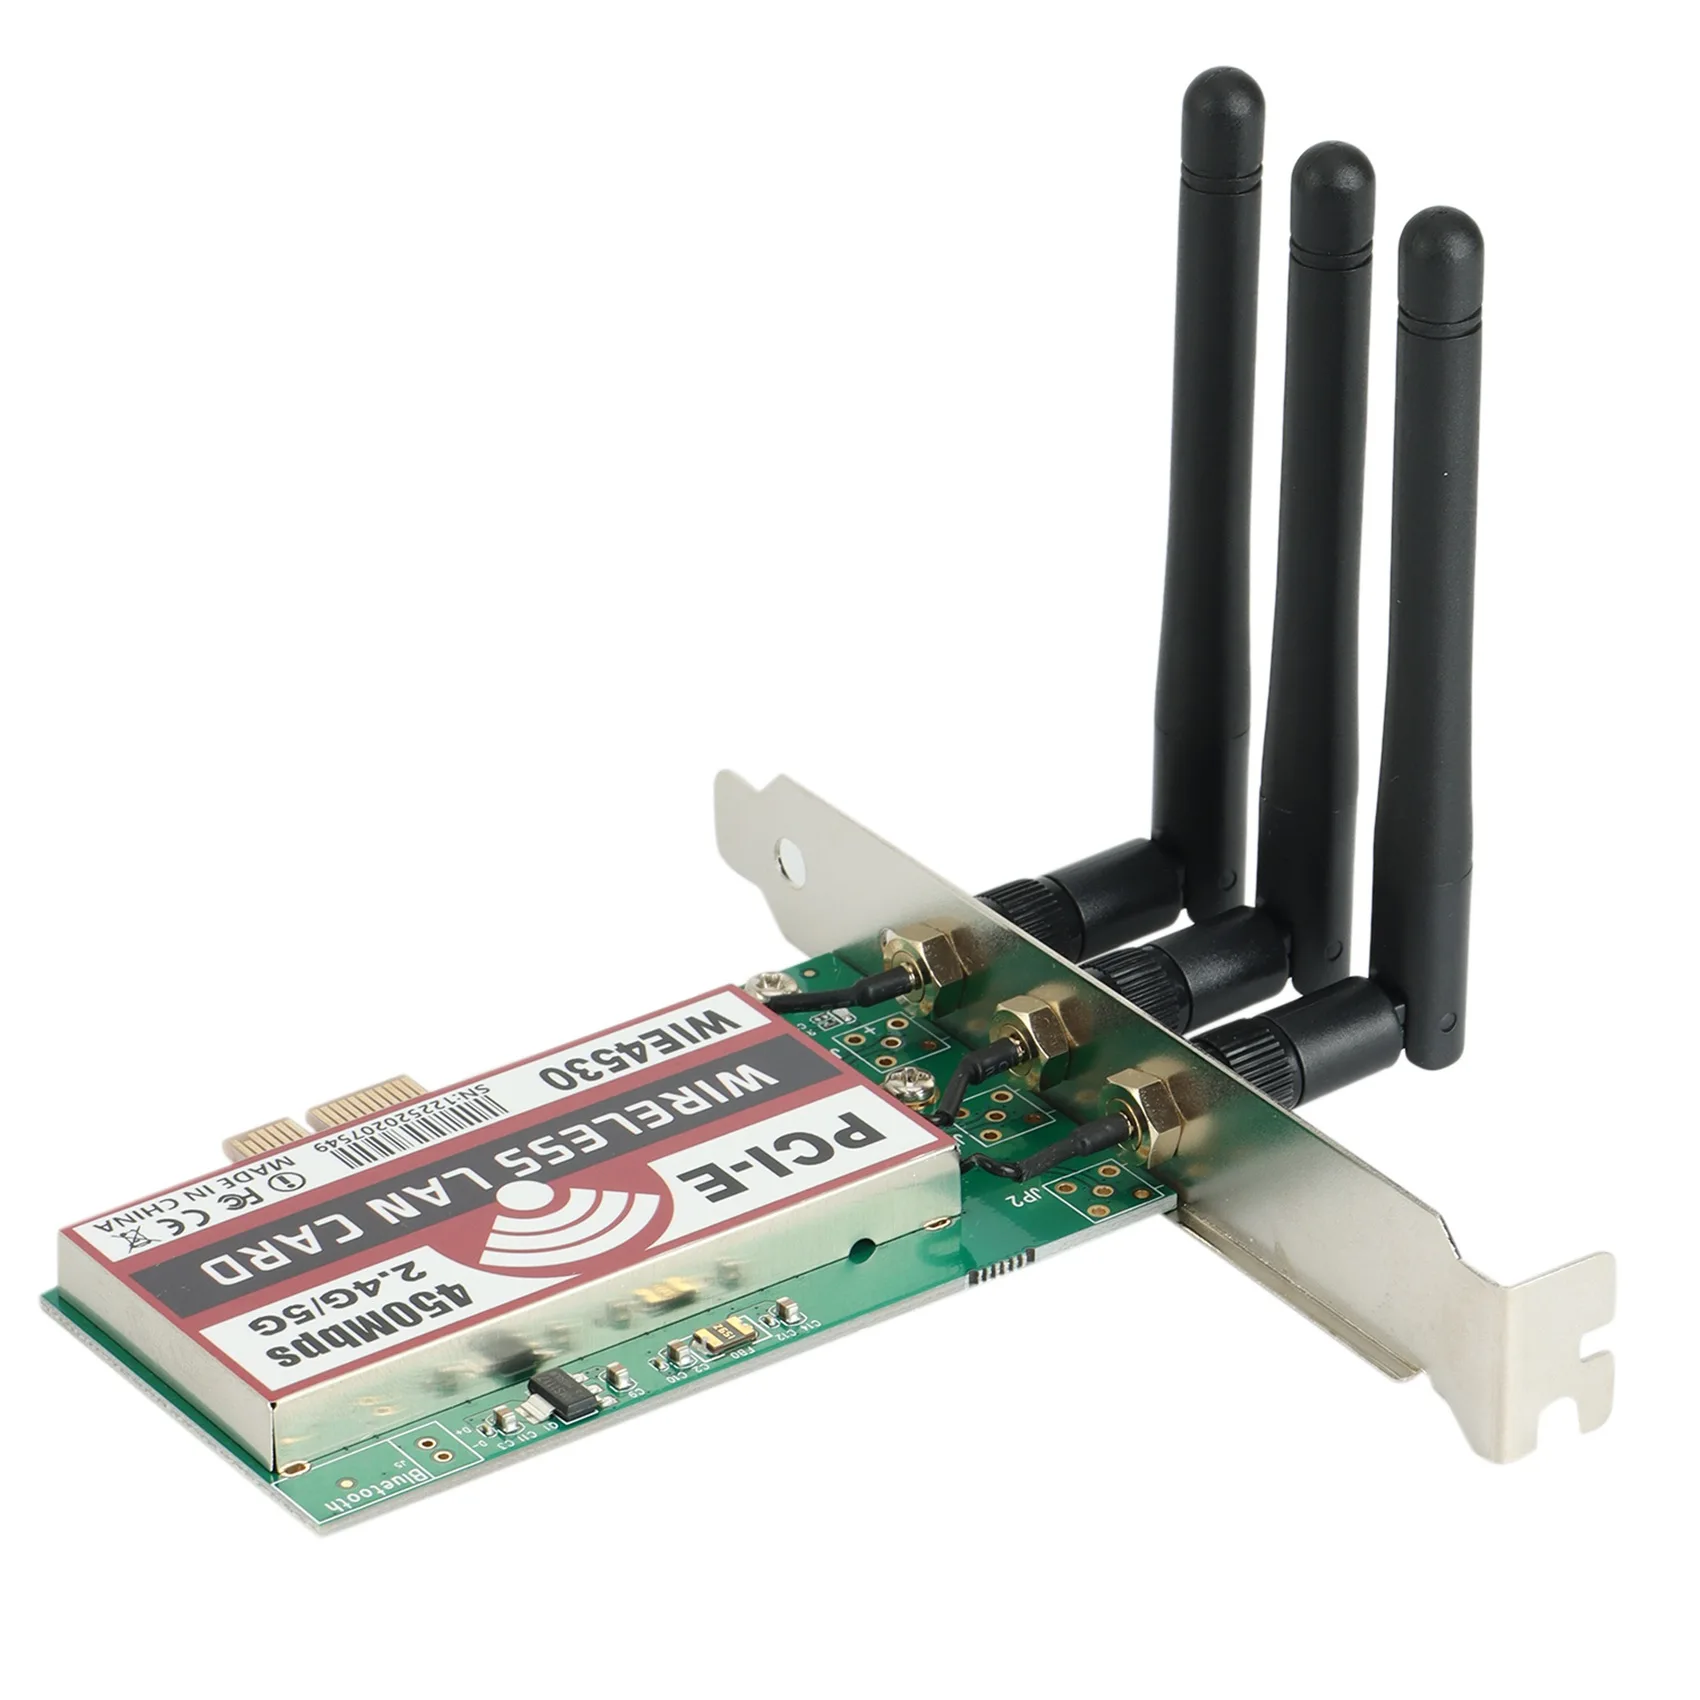 

802.11 B/G/N 450Mbps Wireless WiFi PCI-Express Adapter Network Card for Intel 5300 Compatible Slot PCI-E X1/X4/X8/X16